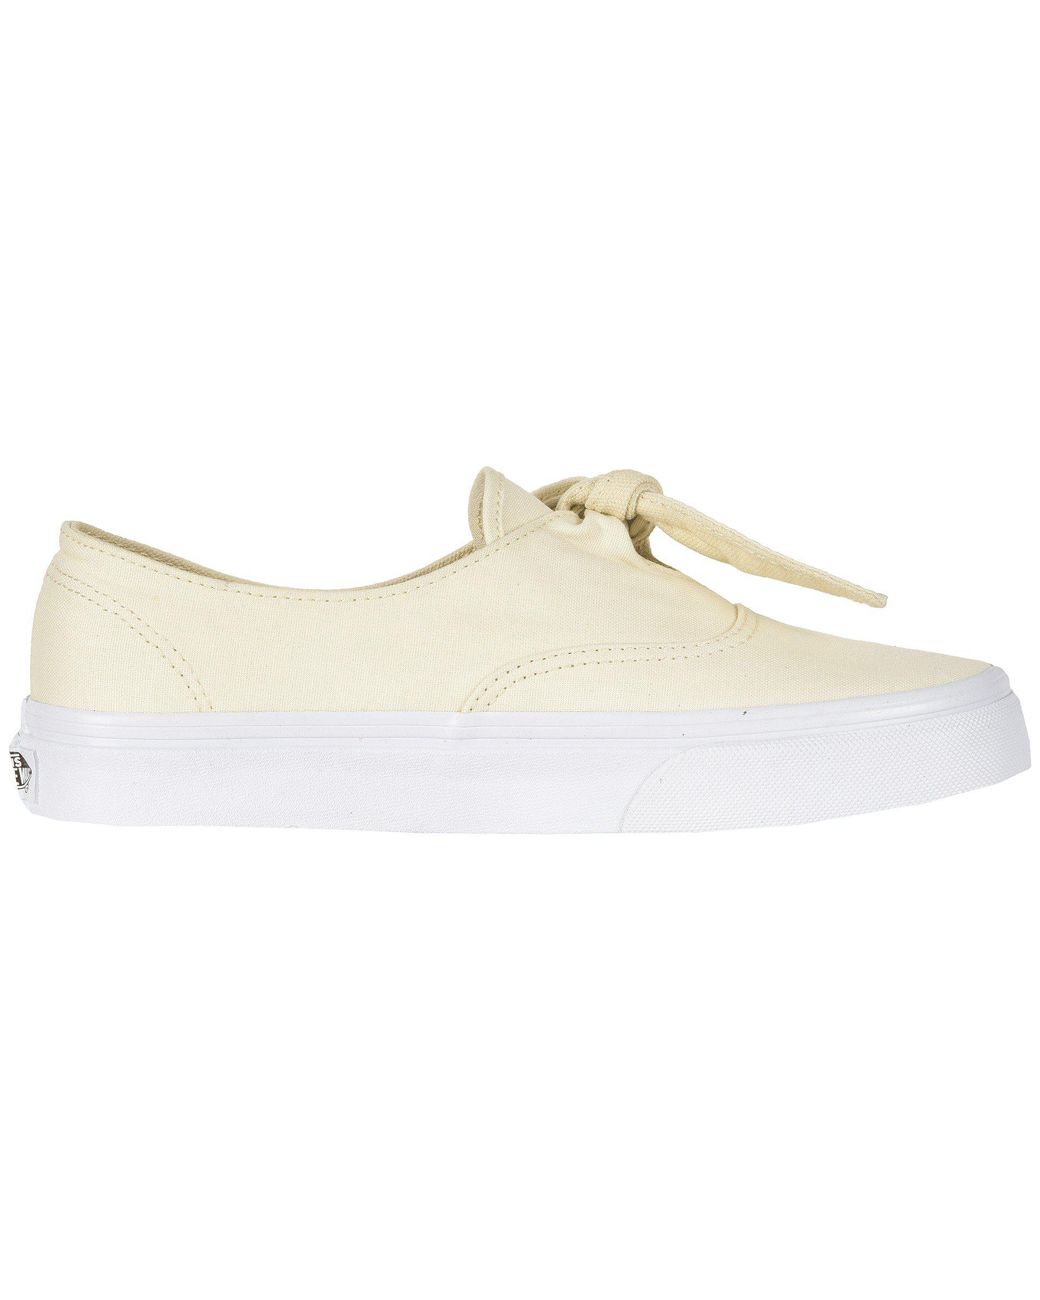 Vans Authentic Knotted | Lyst